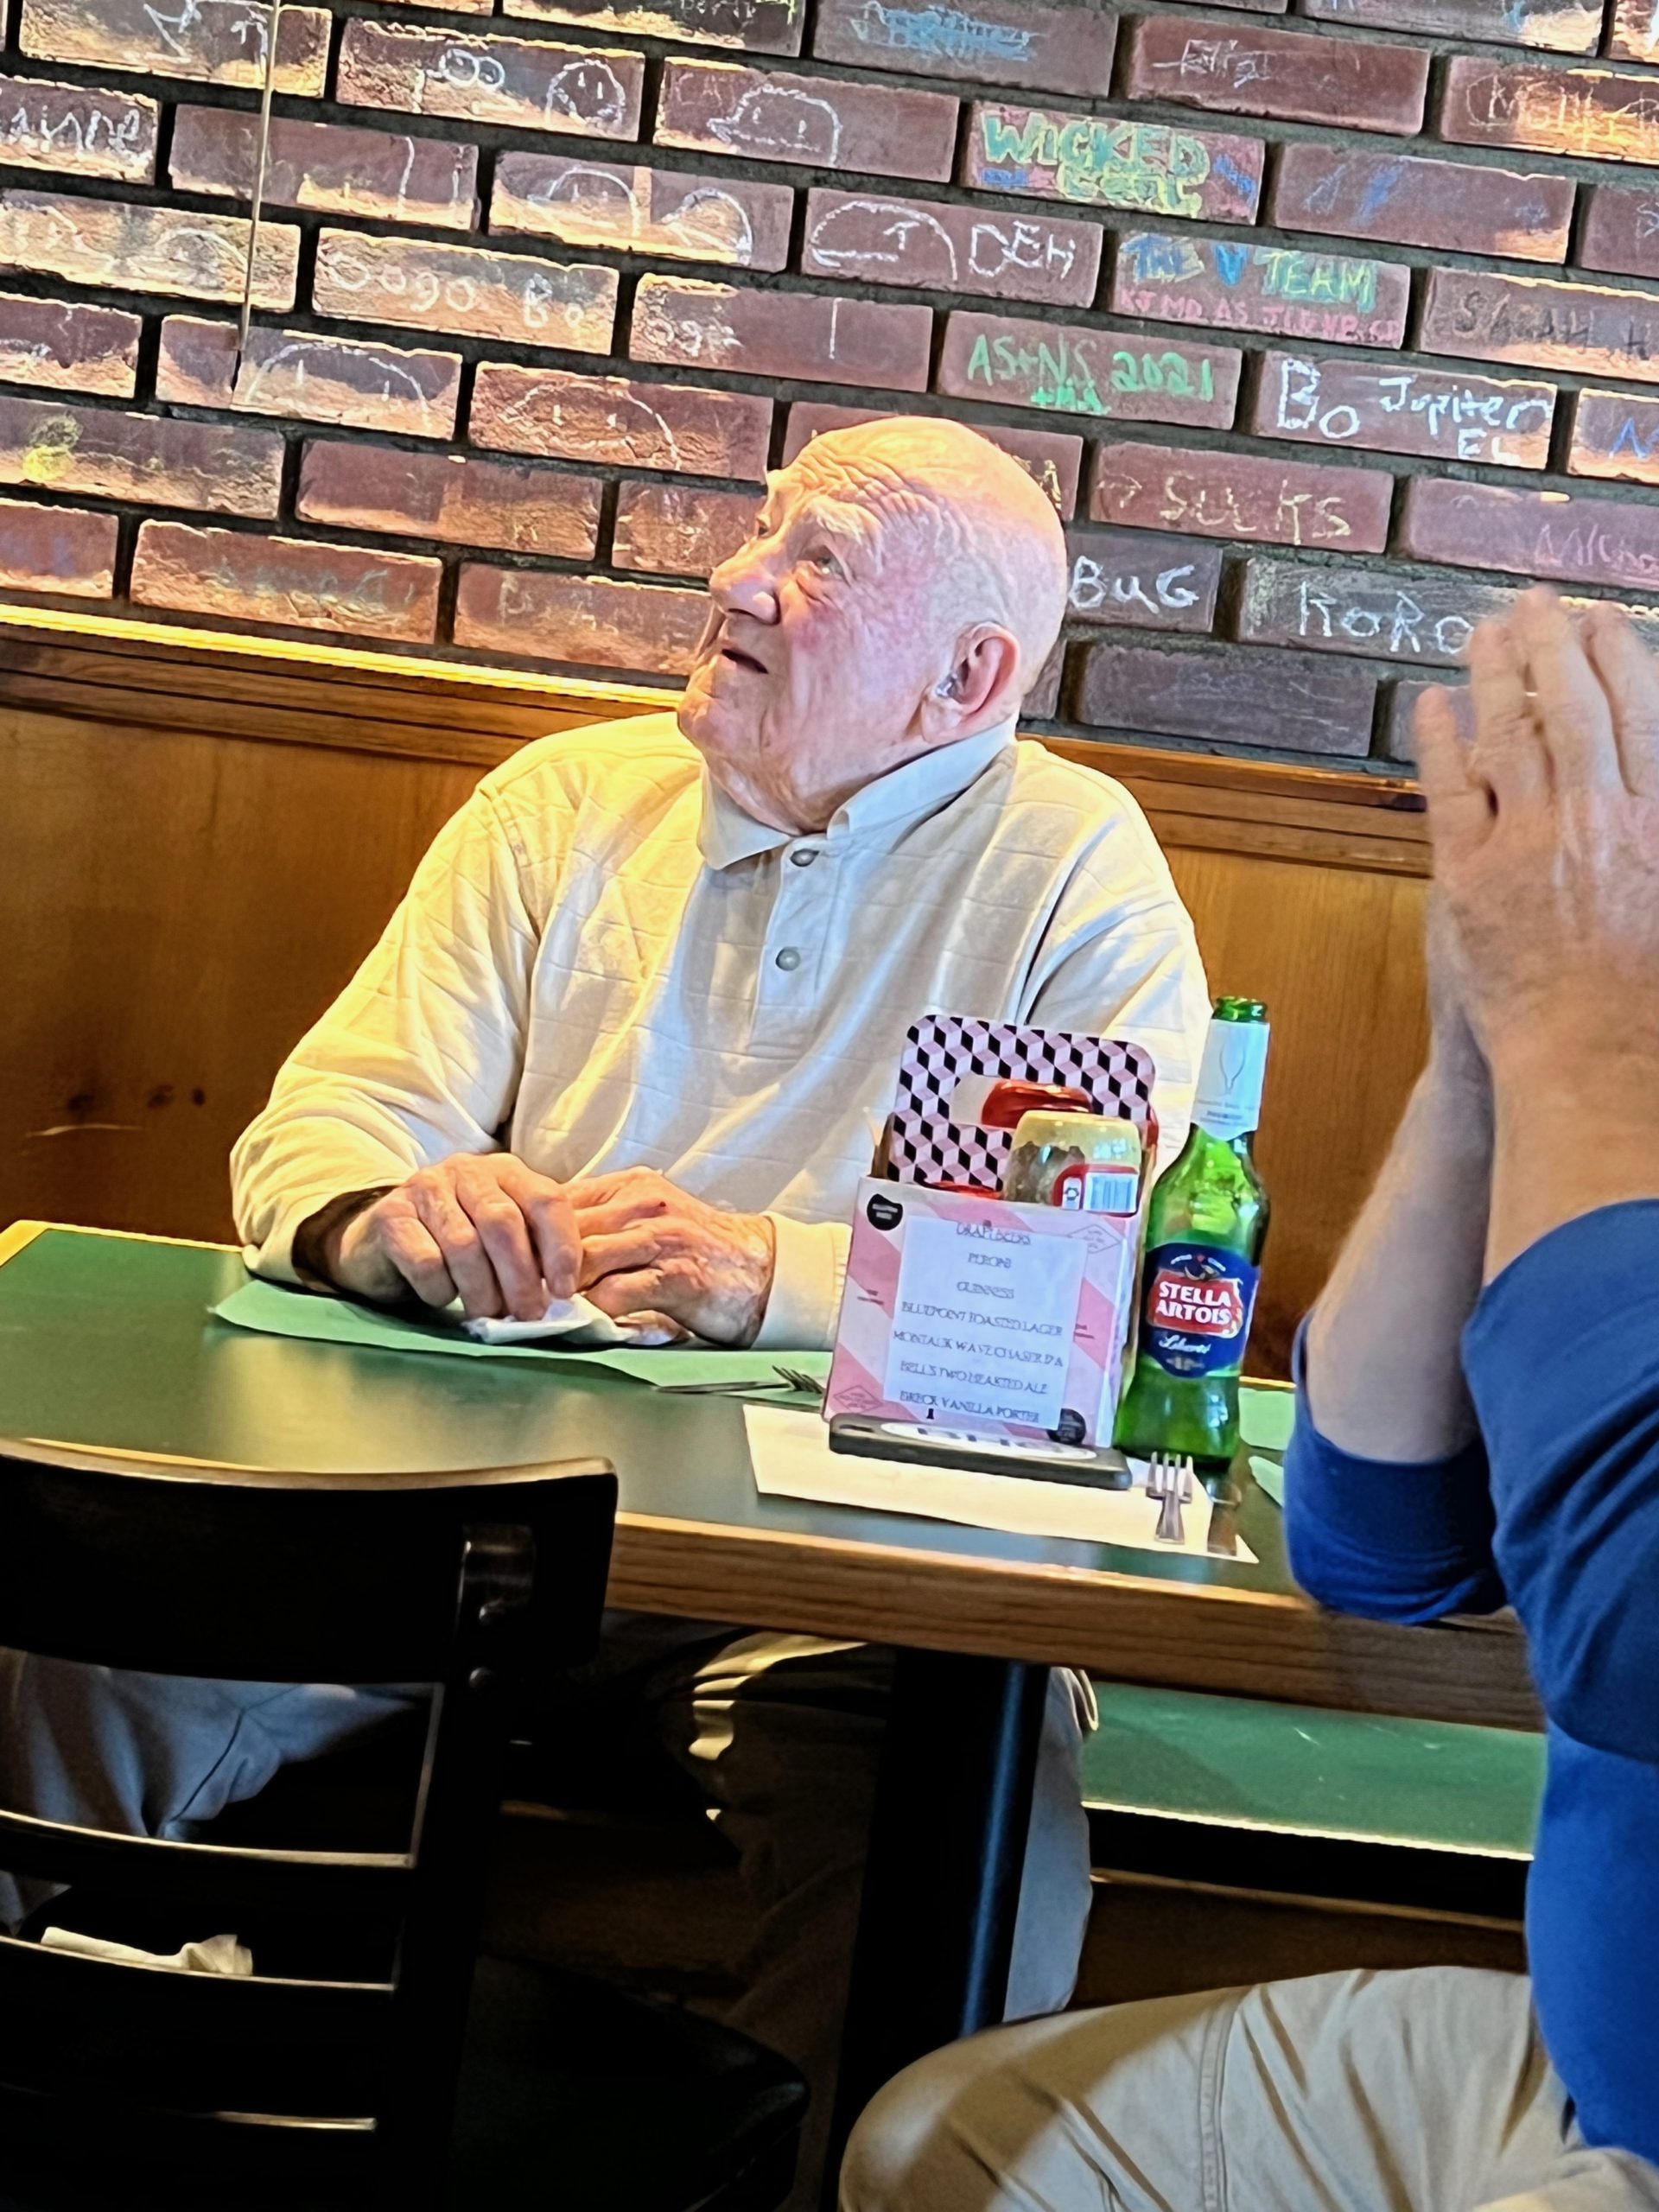 Former Pierson basketball coach Bob Vishno, who coached the Whalers to their one and only state championship in 1978, watching this year’s team compete last Friday on TV at the Corner Bar in Sag Harbor. The Whalers lost to Newfield, the eventual state champion, in the state semifinal, 66-62.